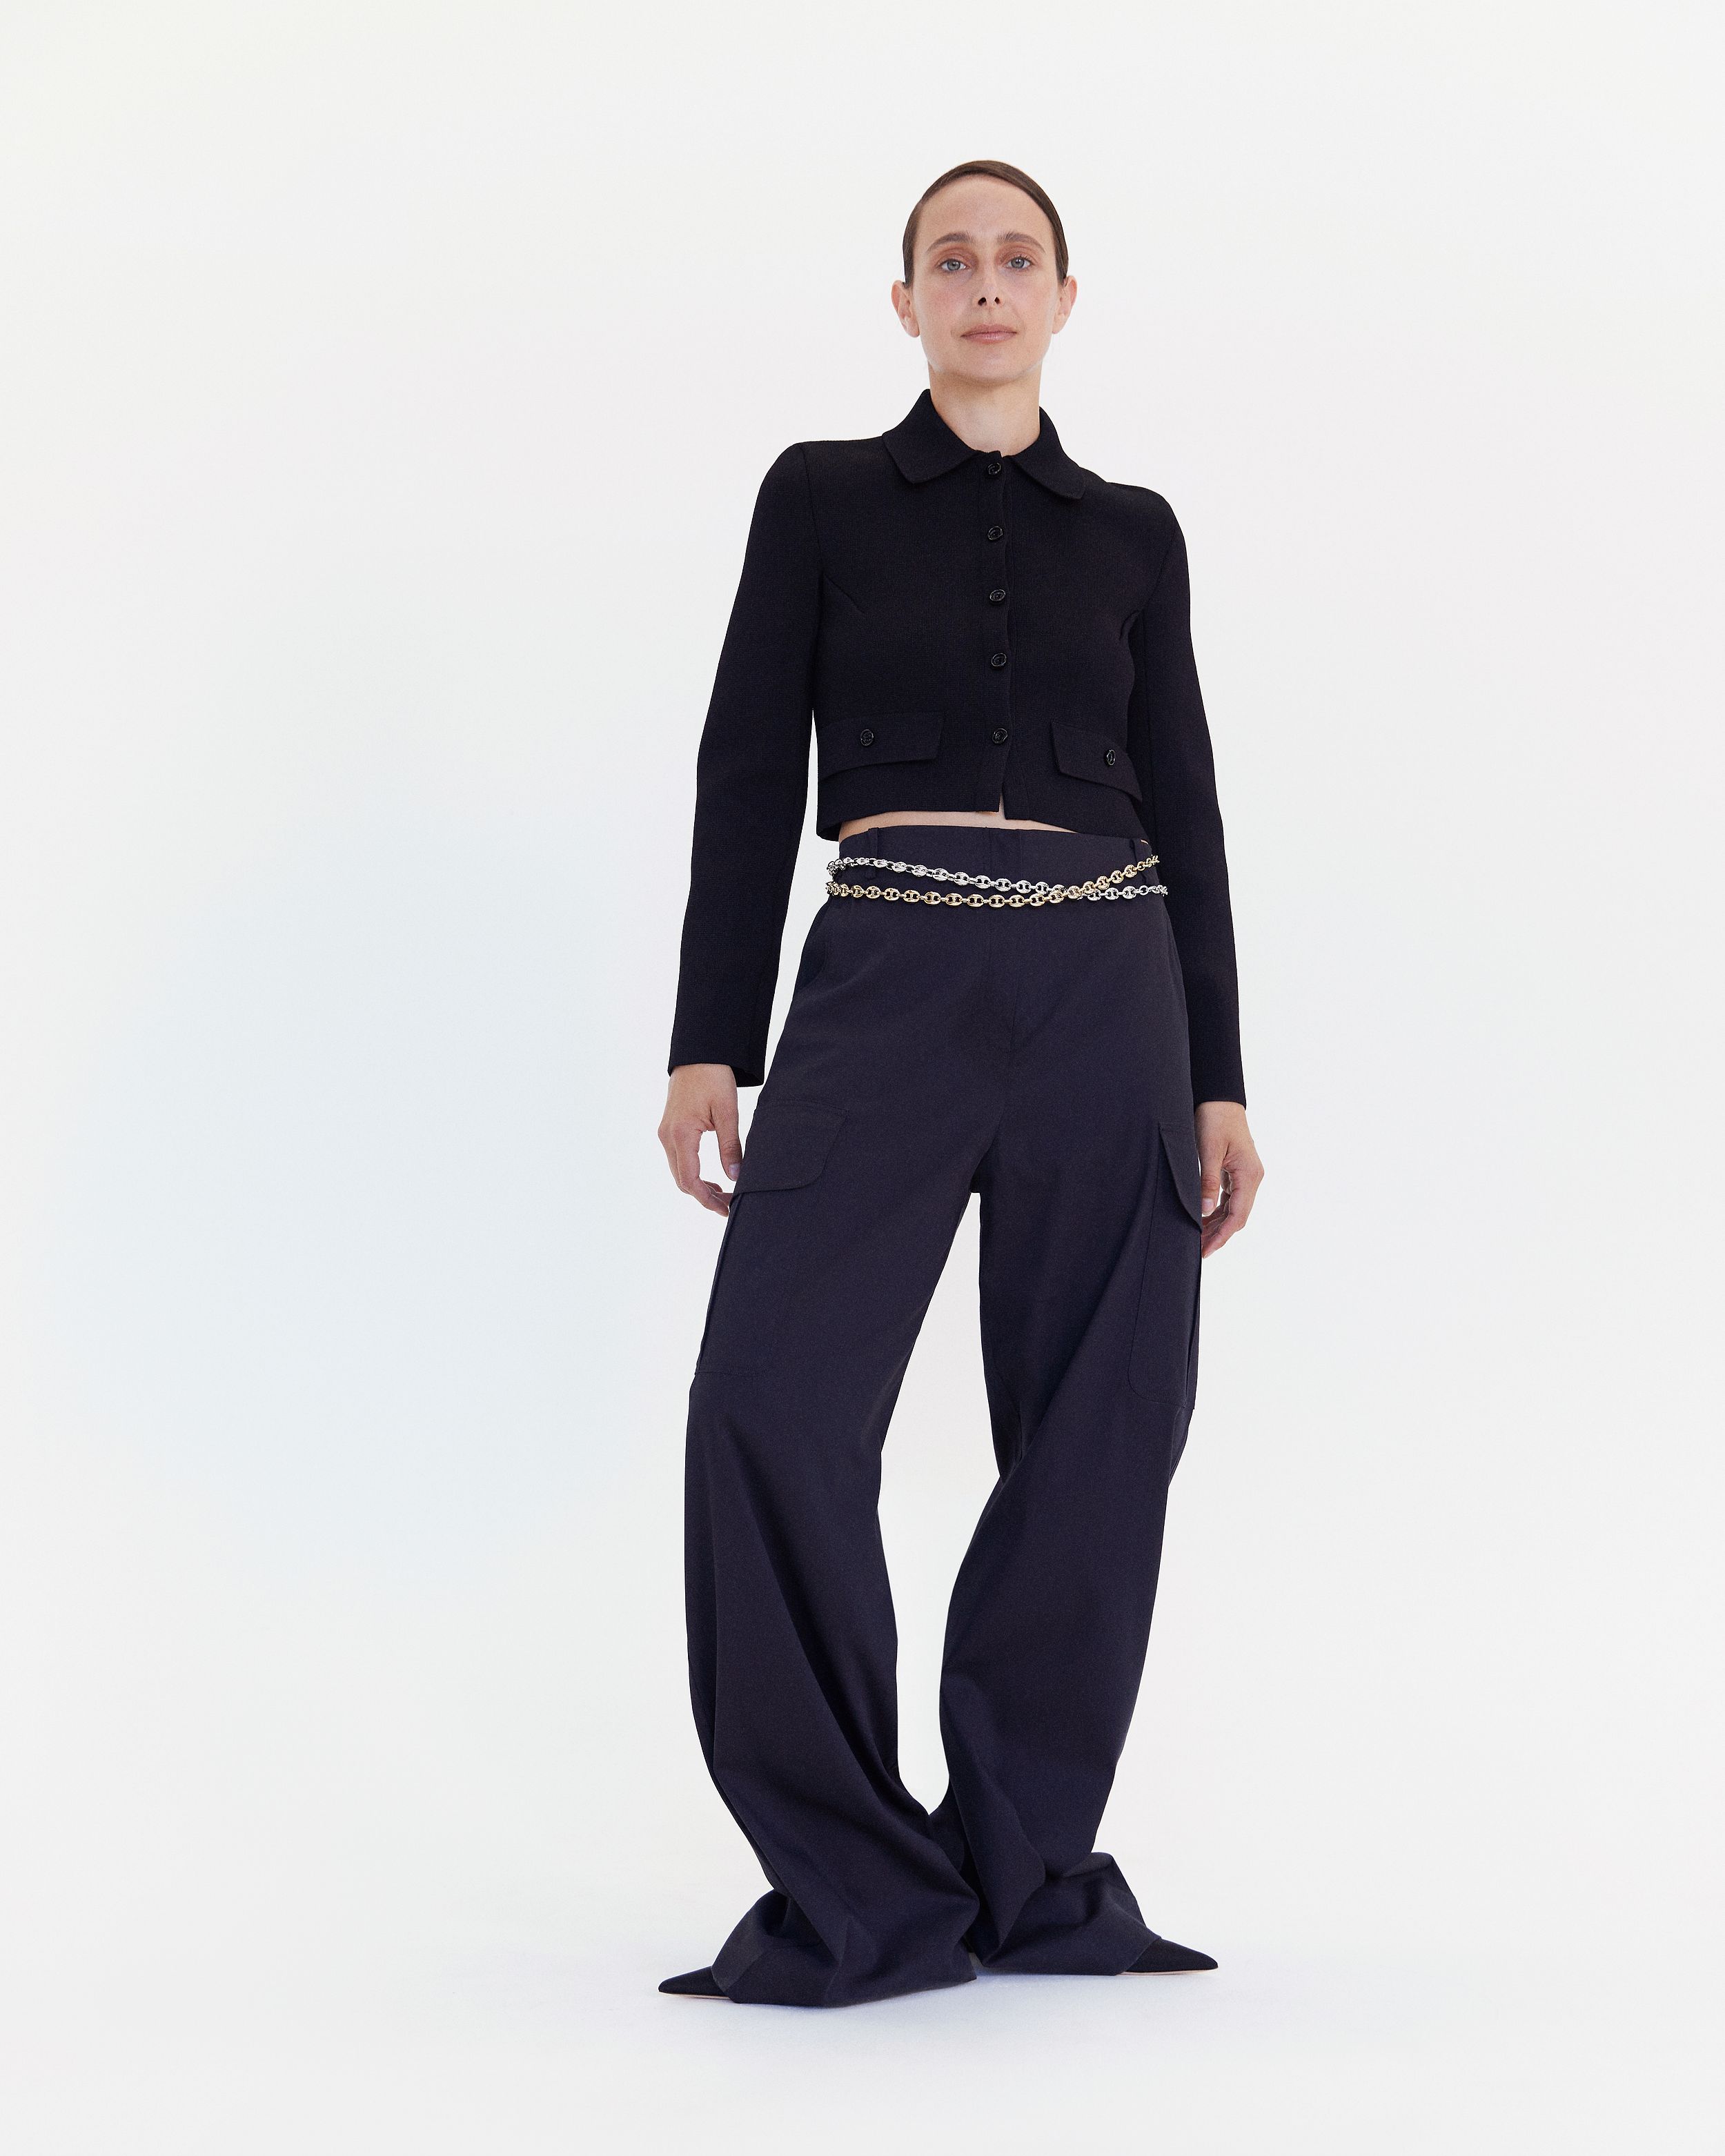 Dimity Azoury standing tall wearing a black cropped jacket and long navy trousers with silver and gold chain belts